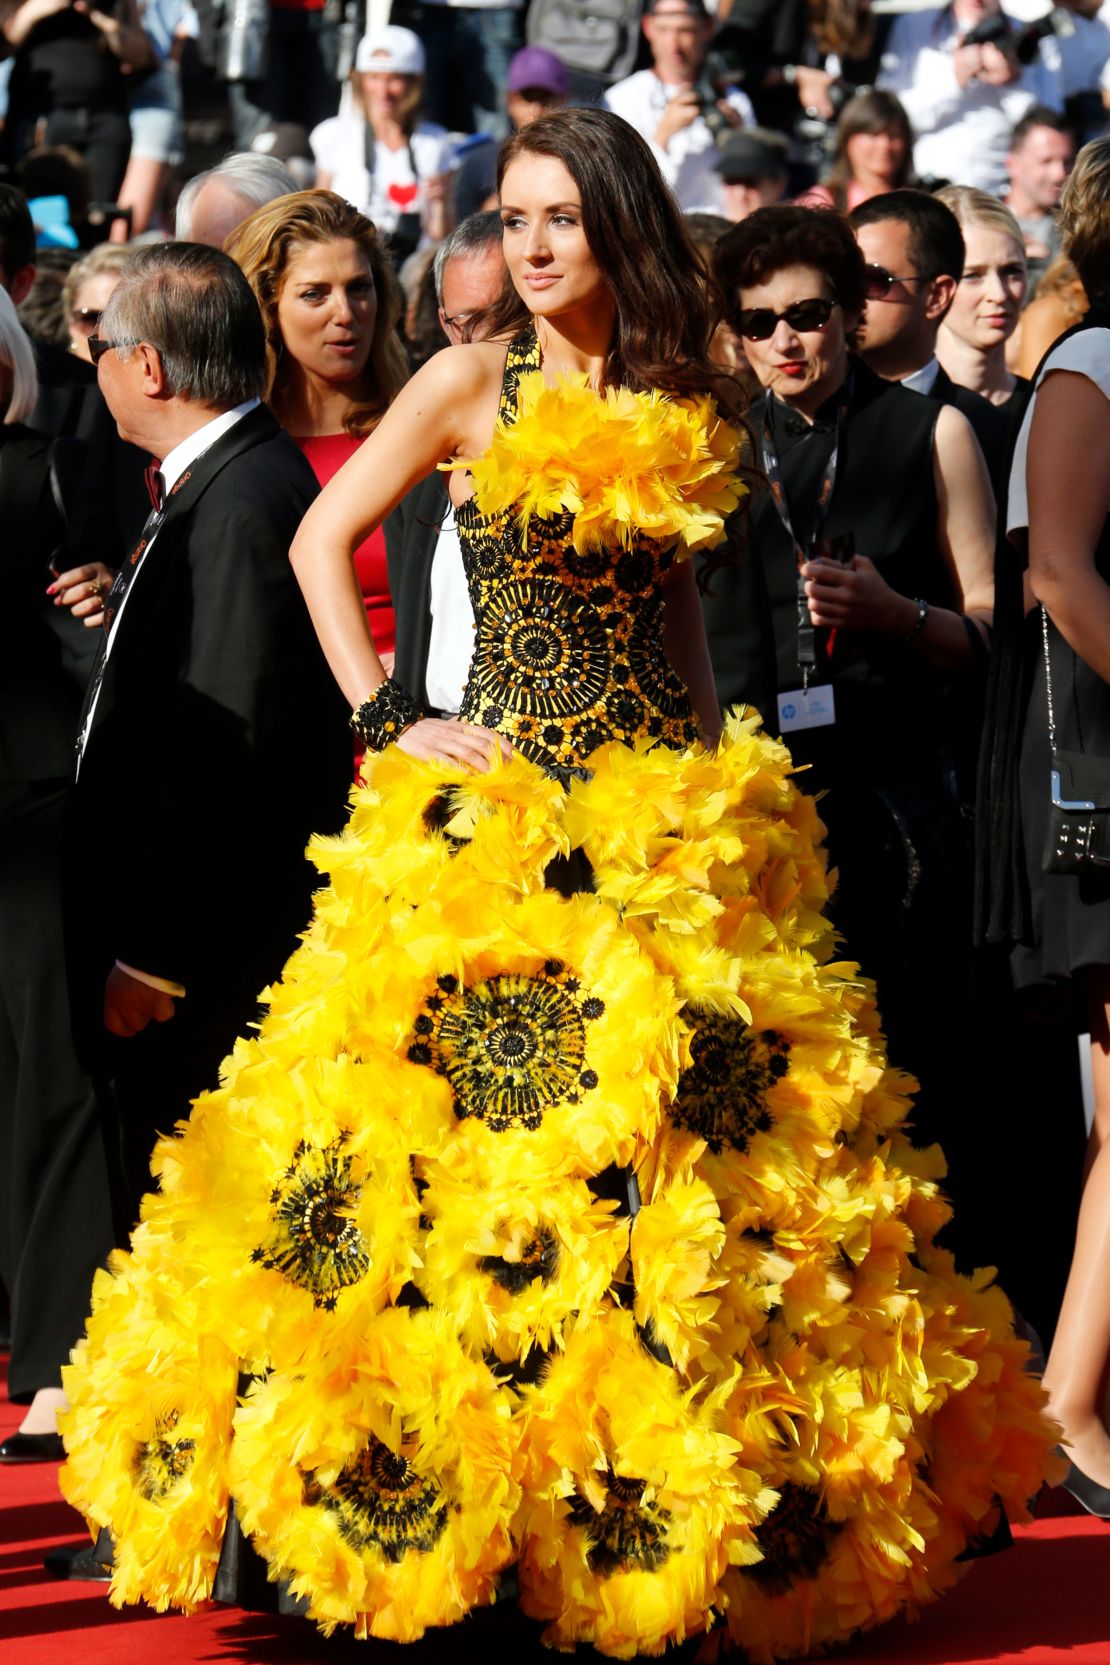 In 2013 two guests put the celebrities to shame with their striking outfits. The first was this sunflower inspired gown worn at the "Zulu" premiere and closing ceremony during the 66th Annual Cannes Film Festival 2013.